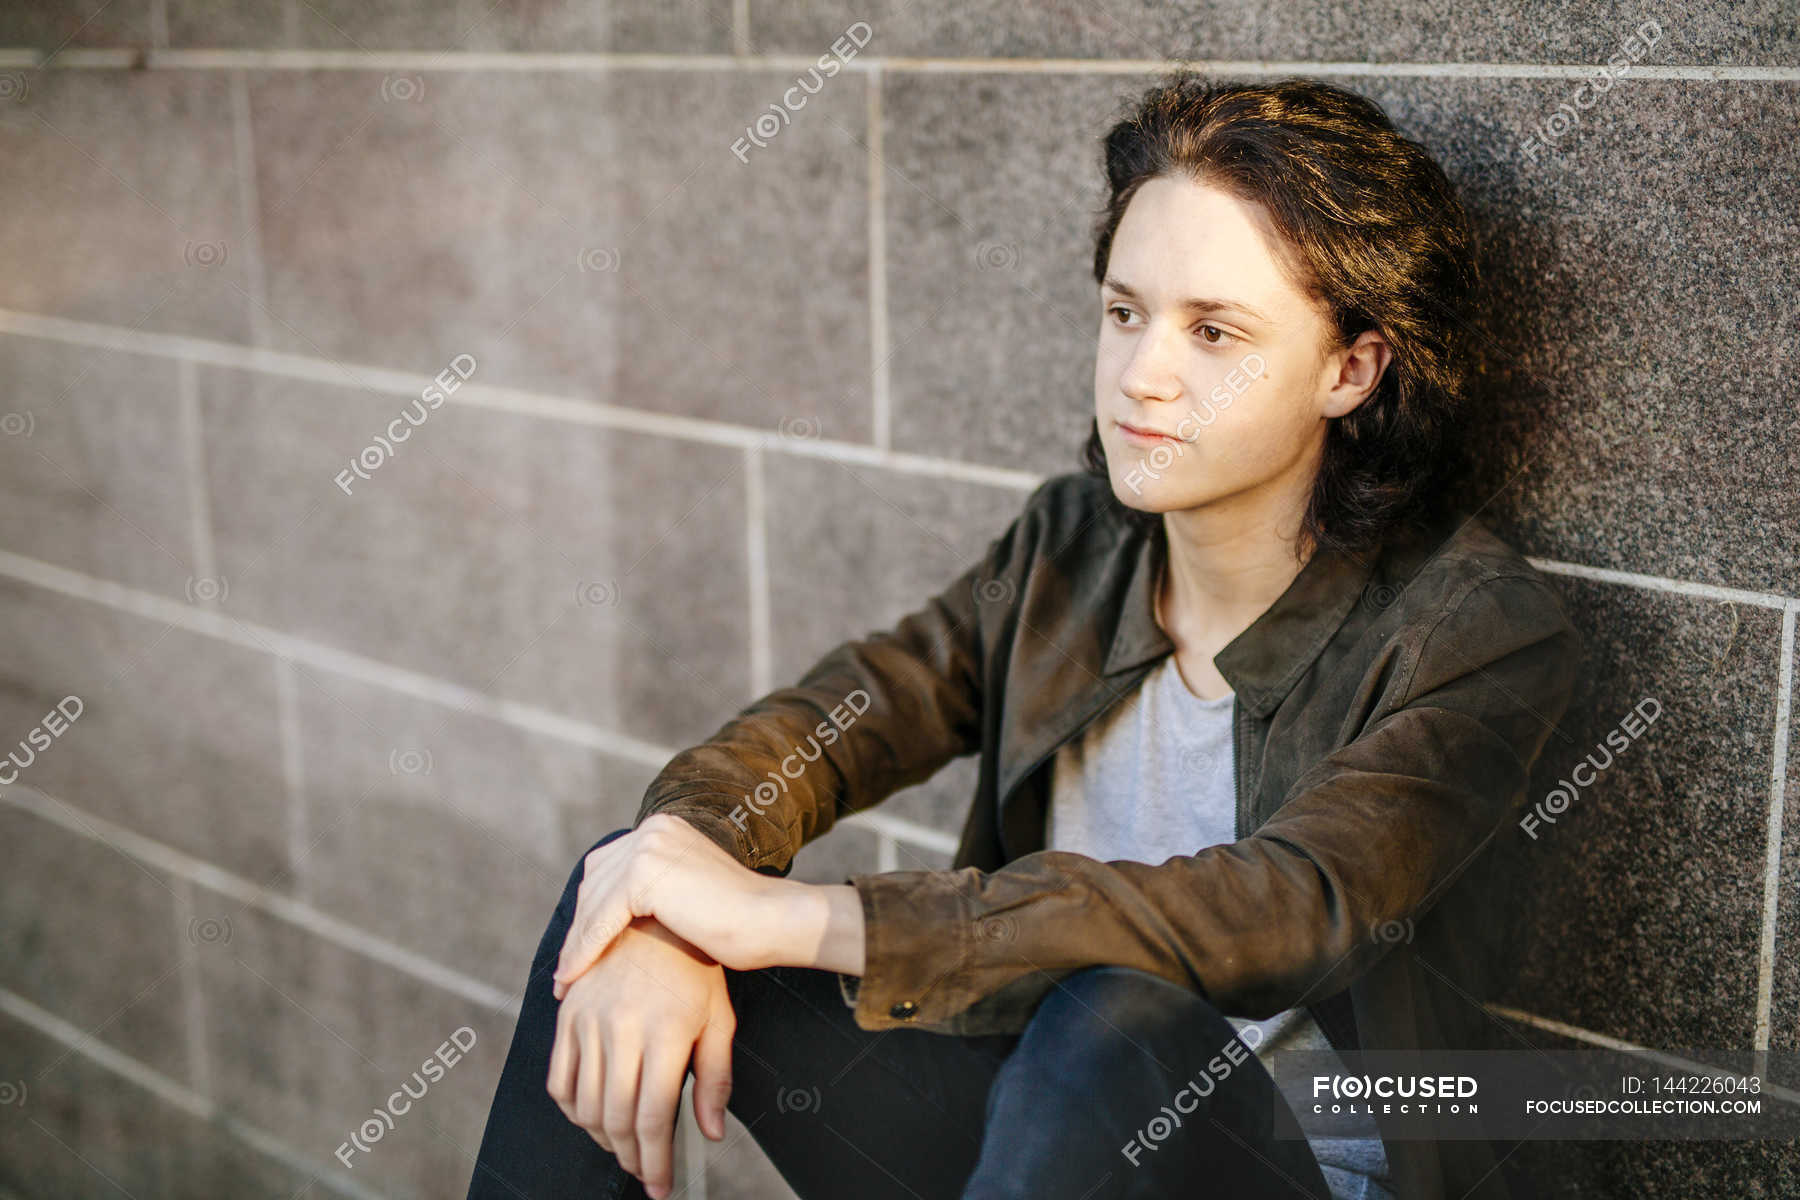 Boy leaning against stone wall, portrait - Stock Photo 